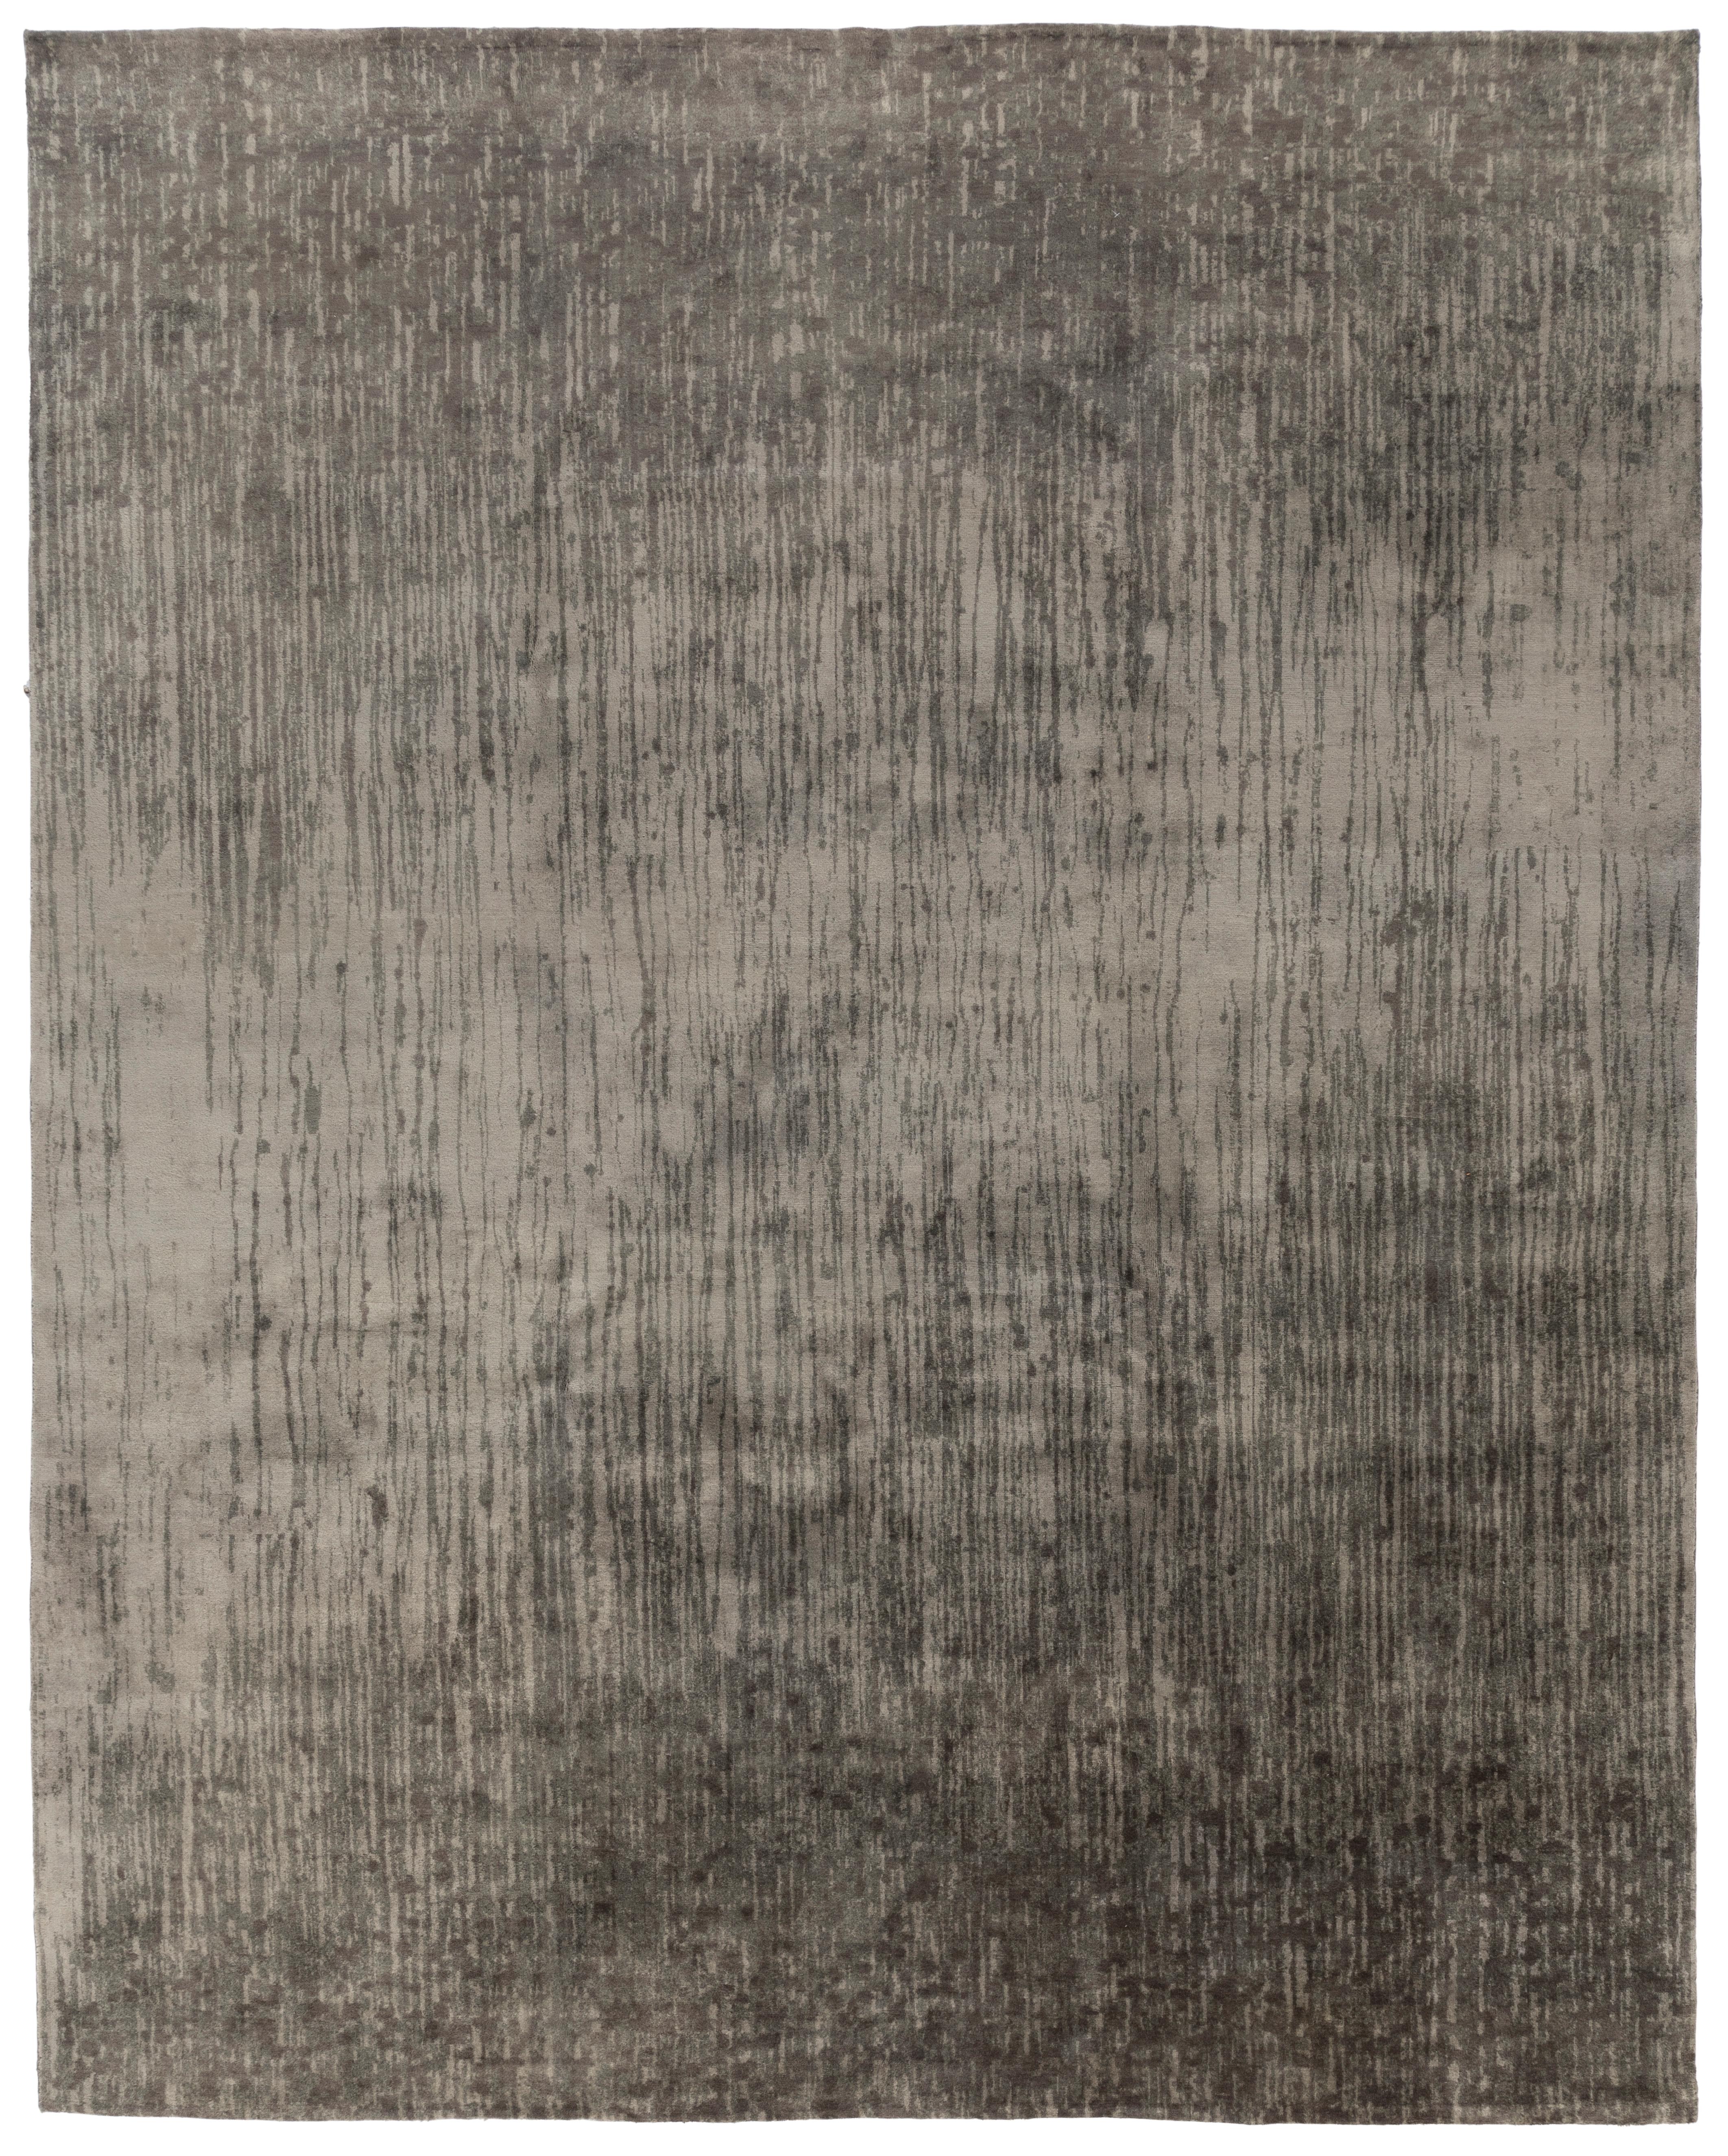 Indian Tufenkian Carpets, Waterfall Charcoal, Contemporary/Modern, Greys